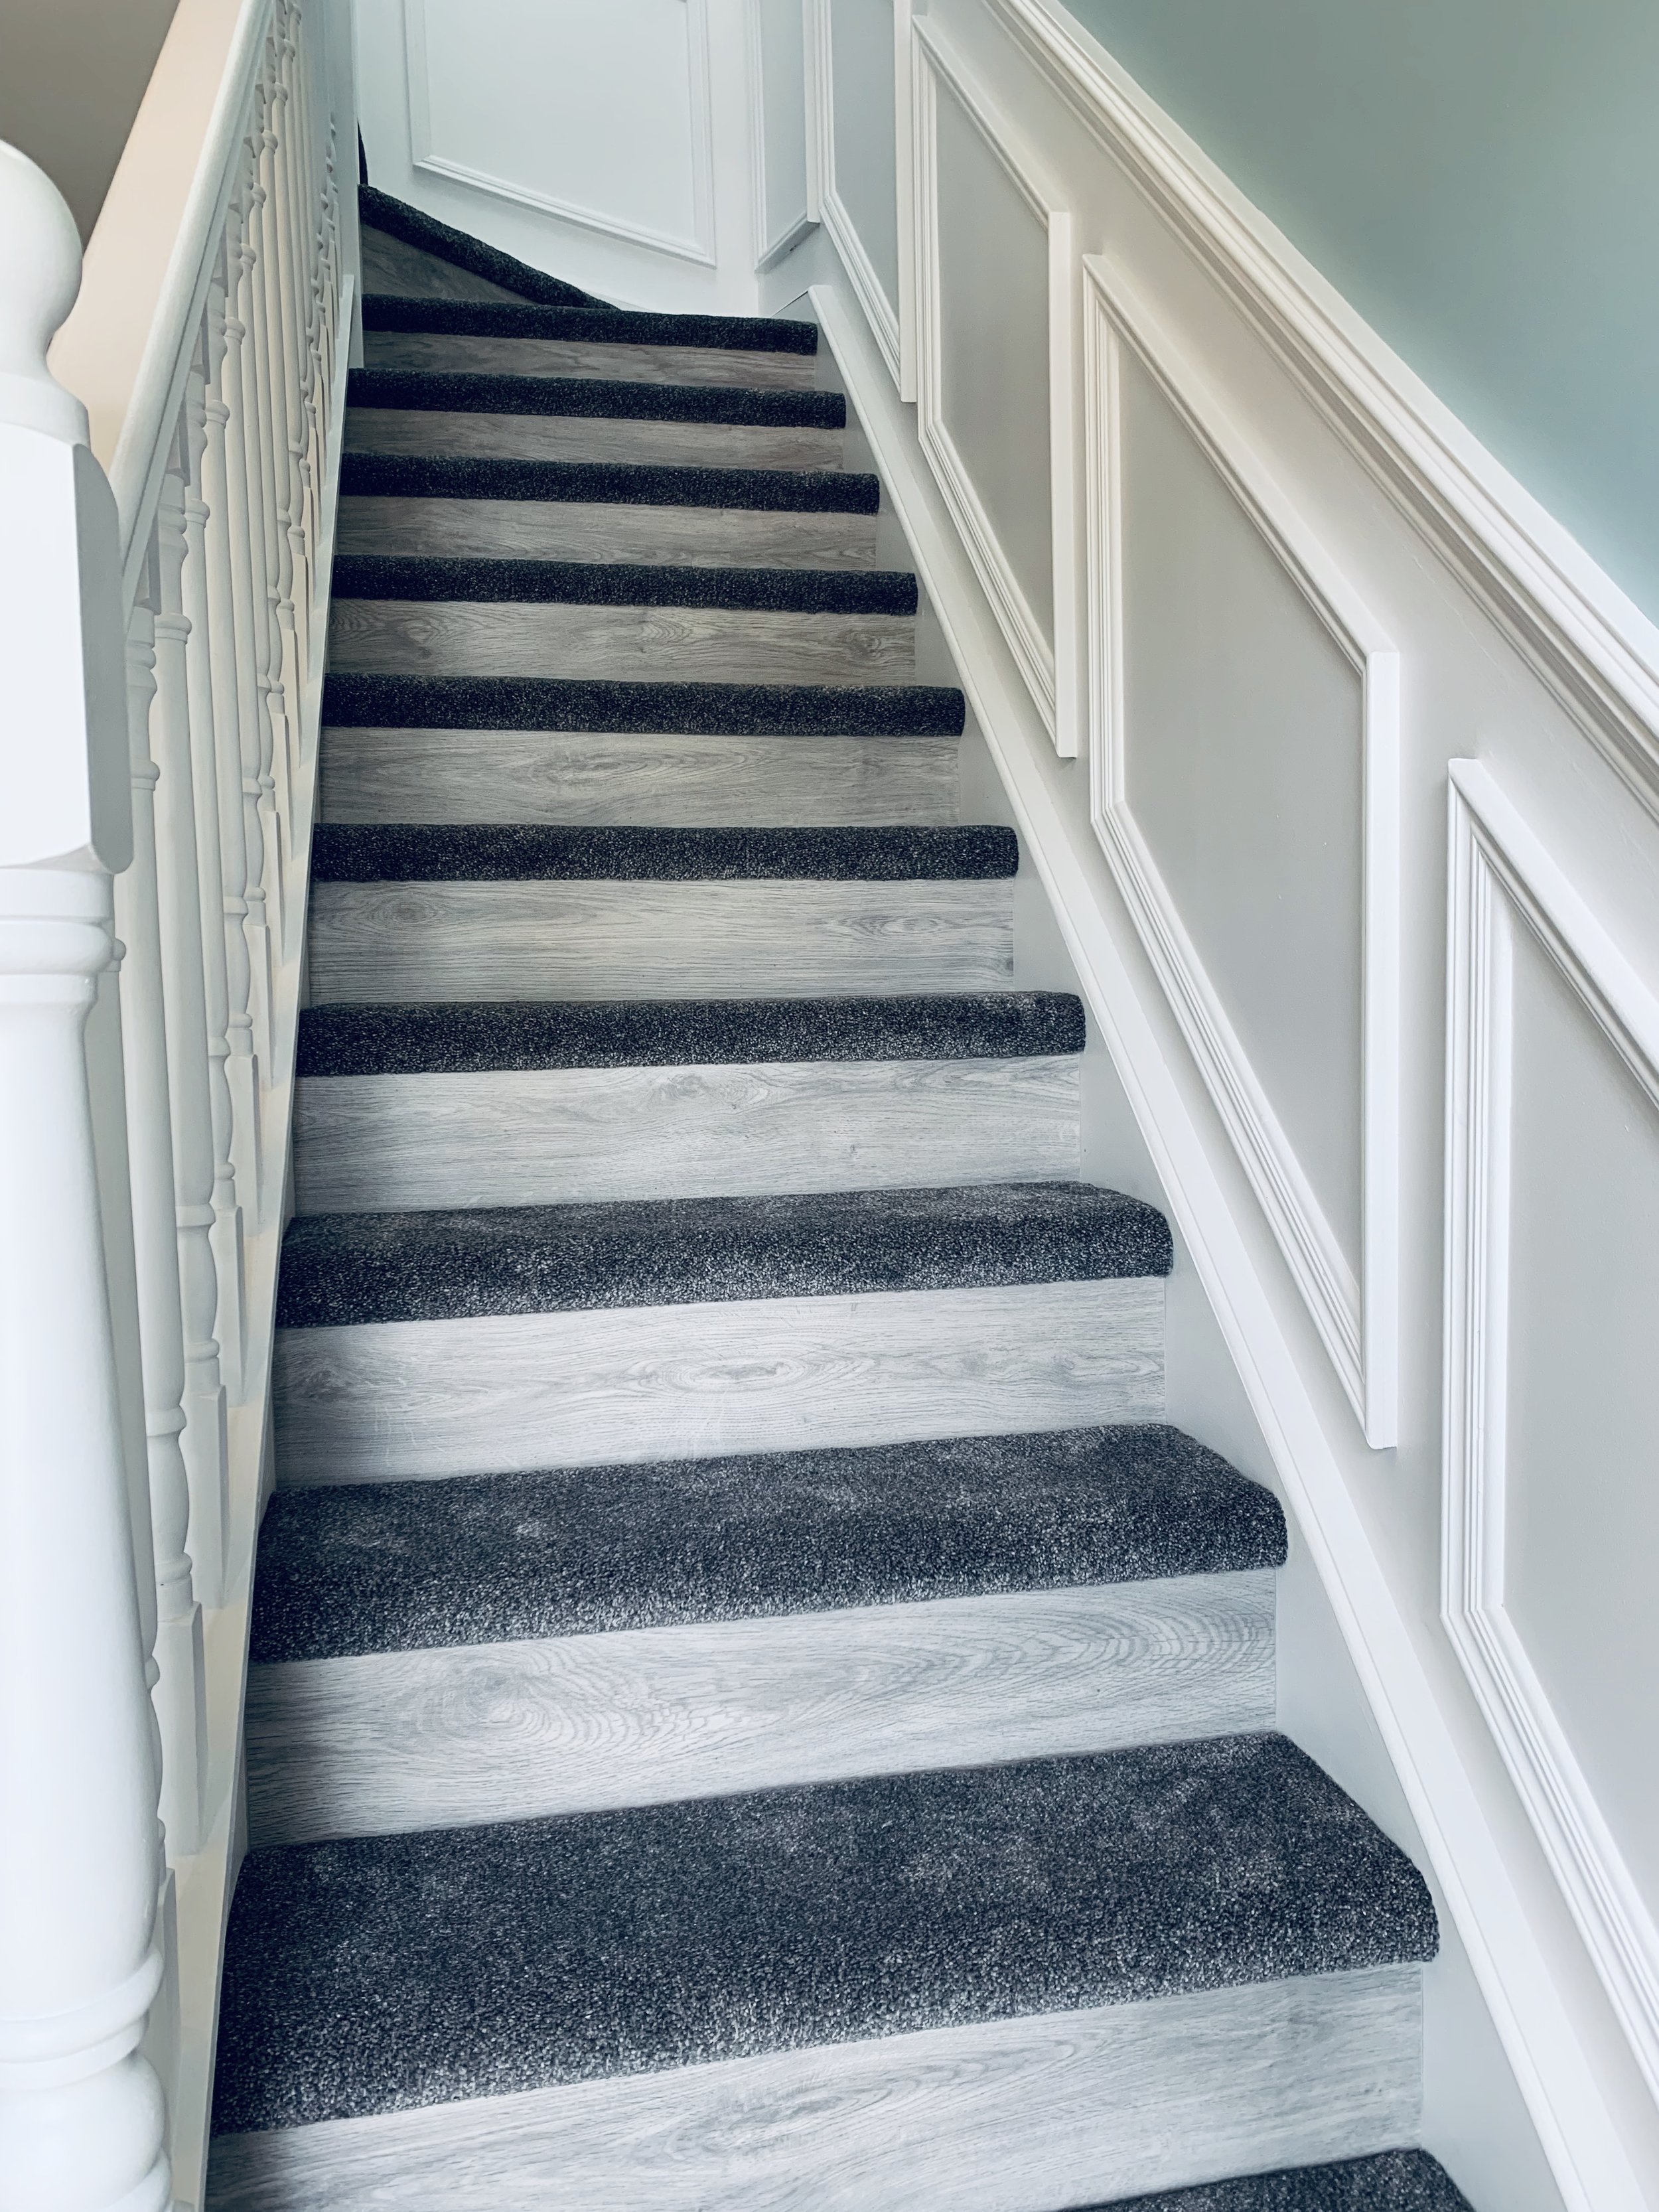 How to Convert Carpeted Stairs to Hardwood